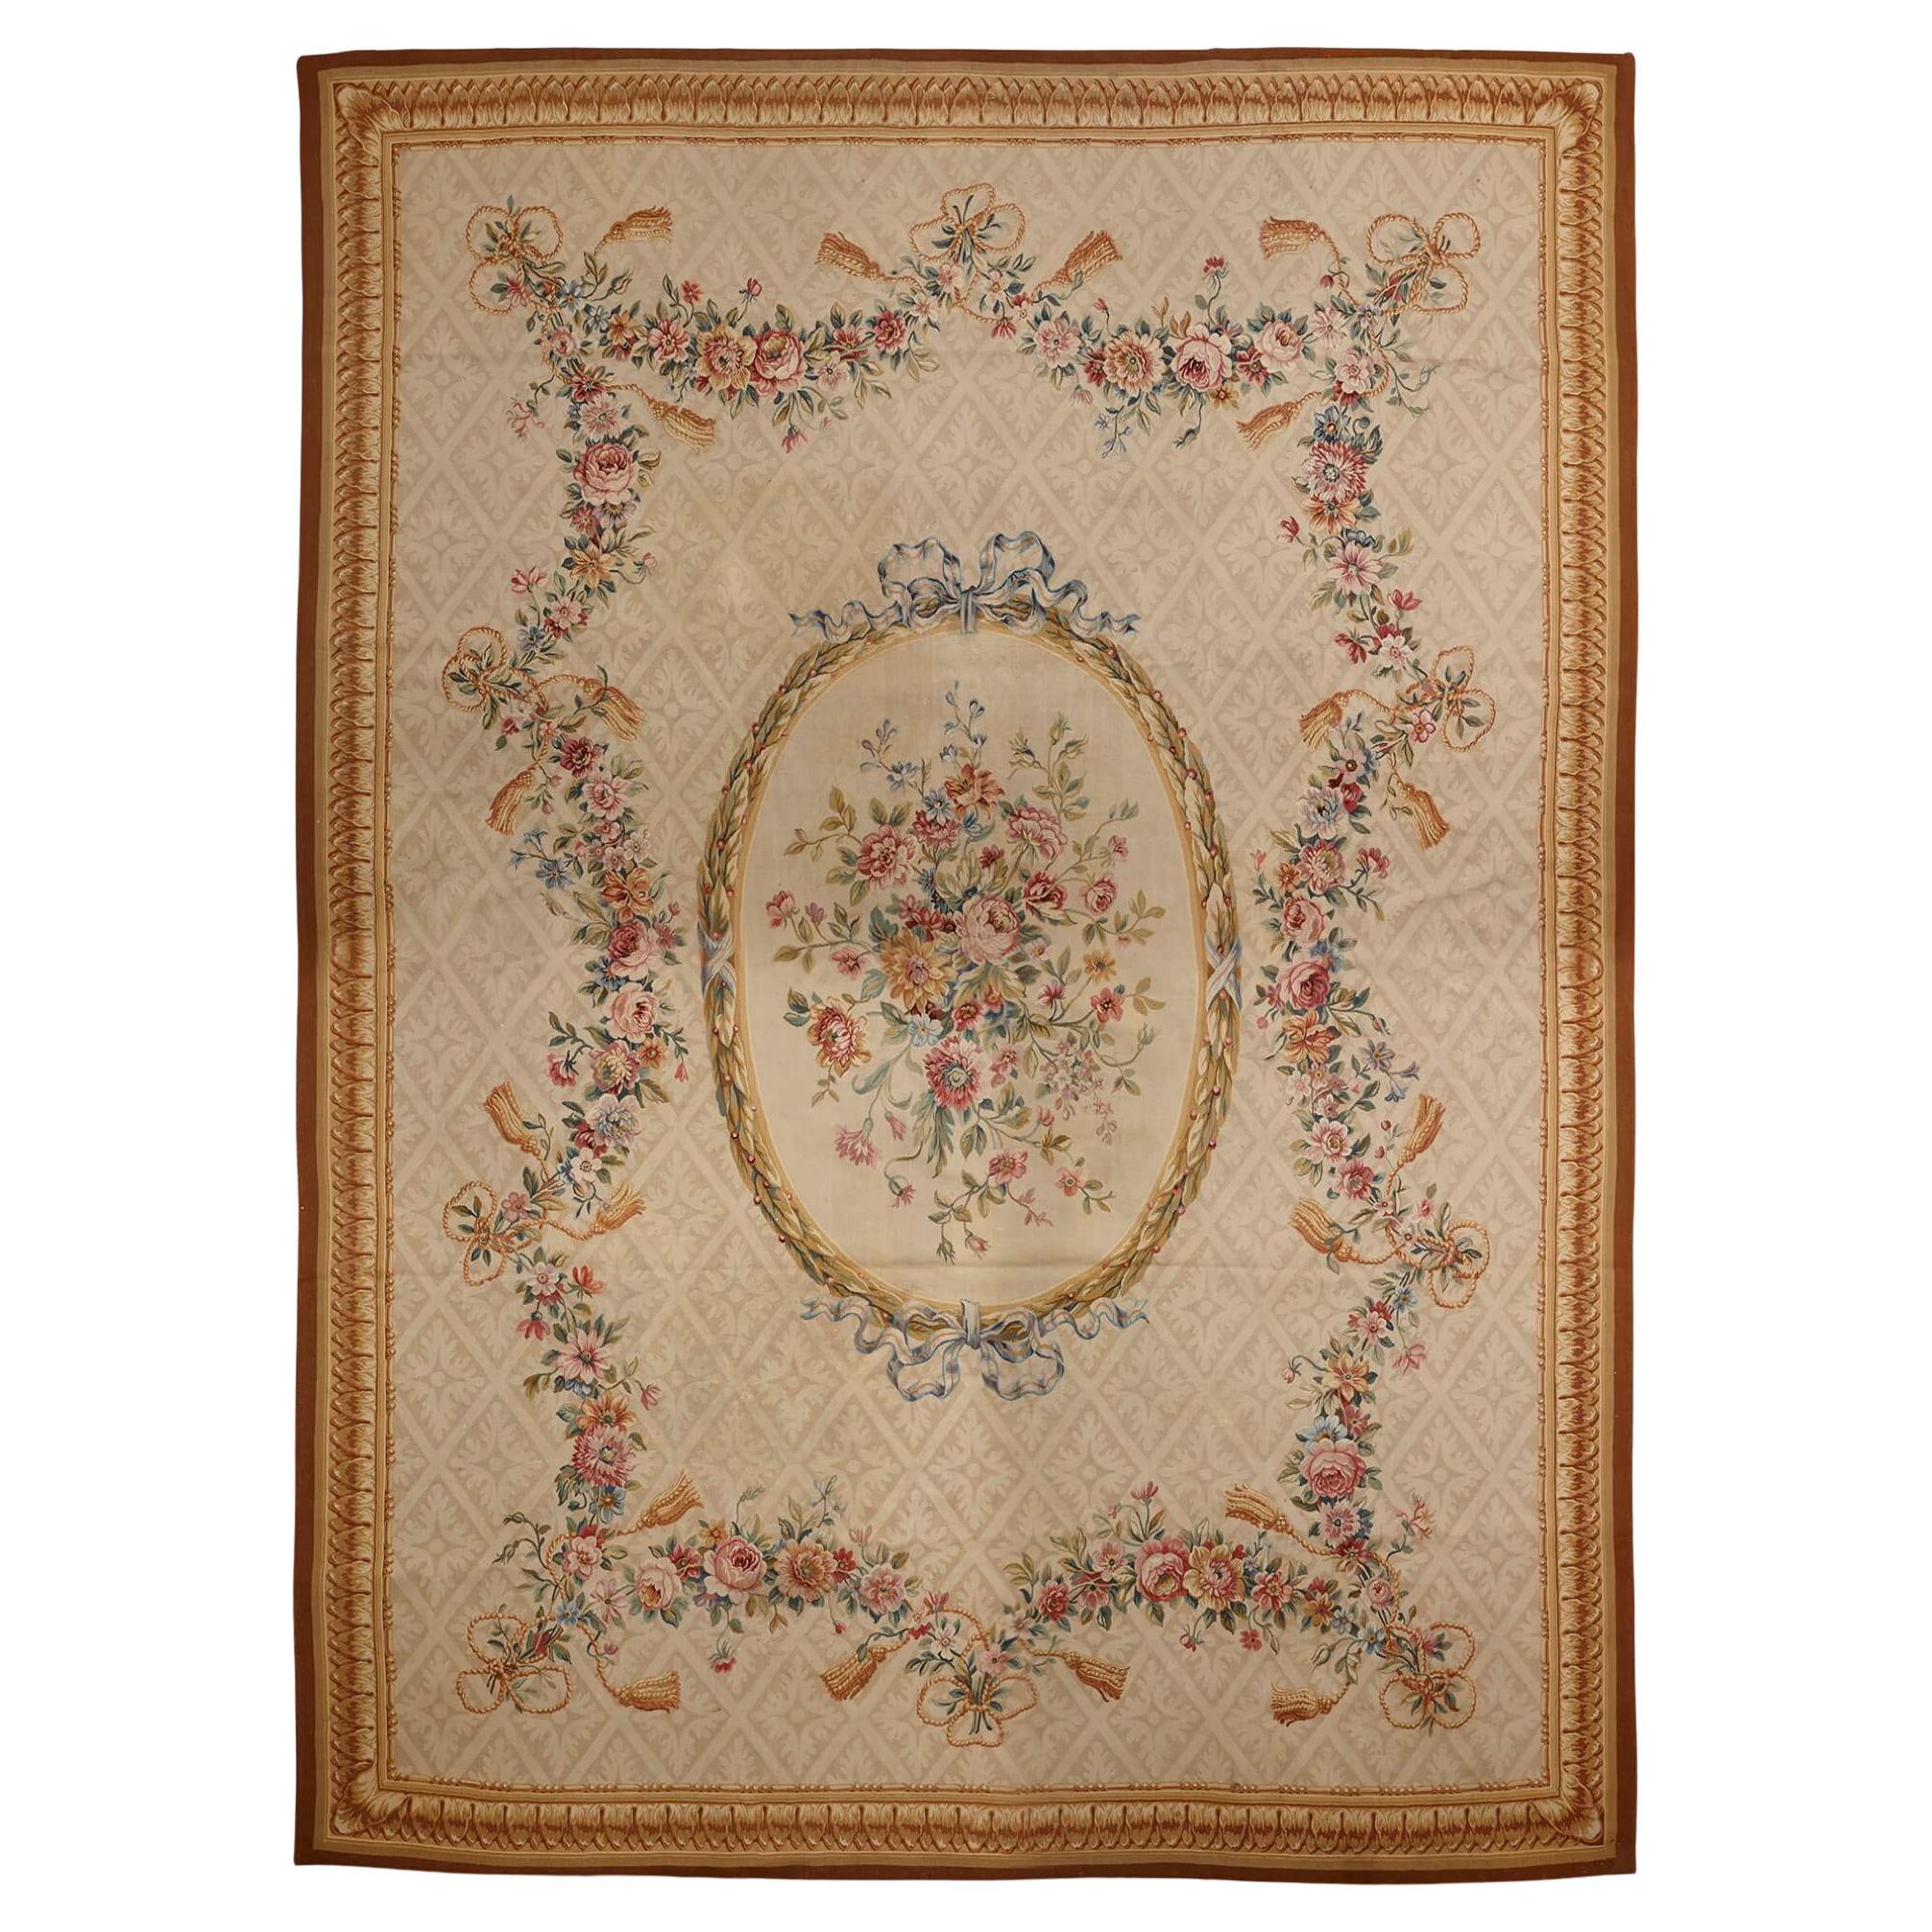 Very Large and Fine Aubusson Floral Carpet